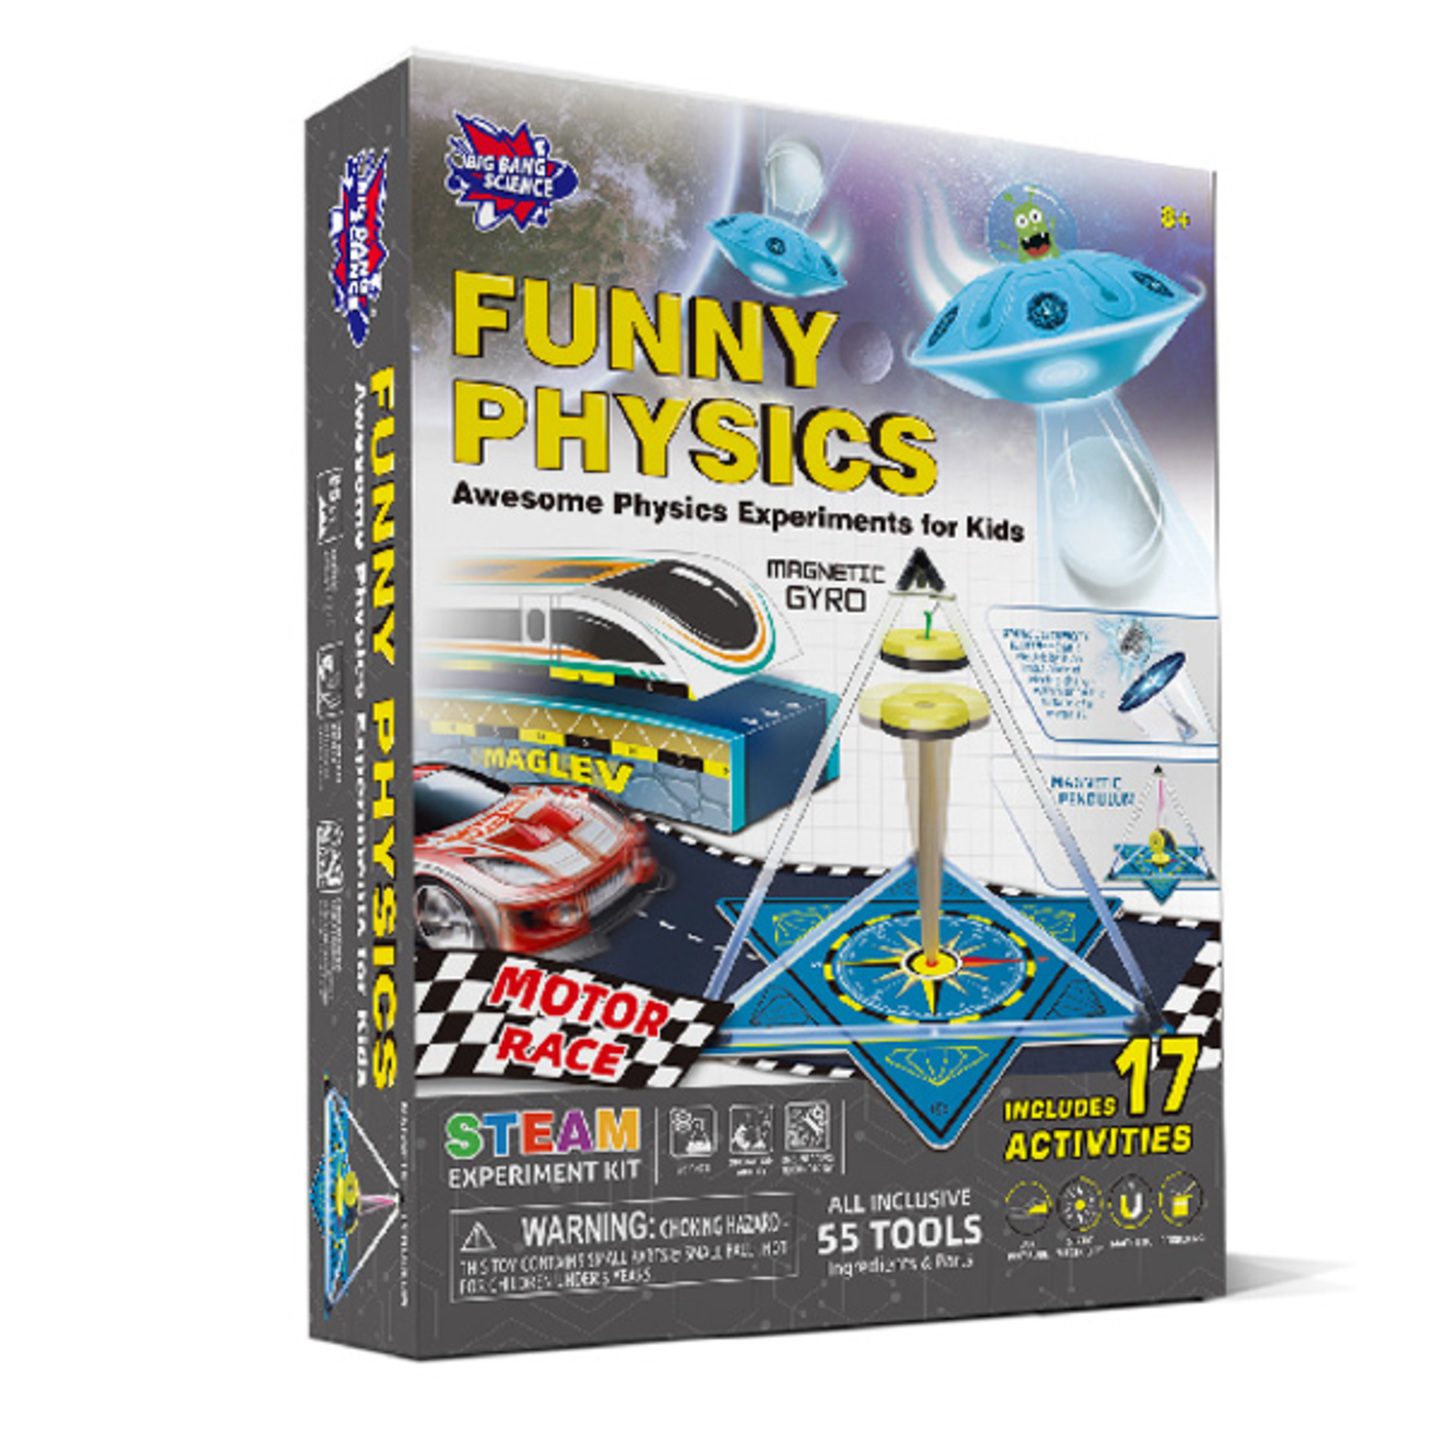 STEM Big Bang Science Experiments on Physics for Kids Learning Teaching Resource Learning Aid